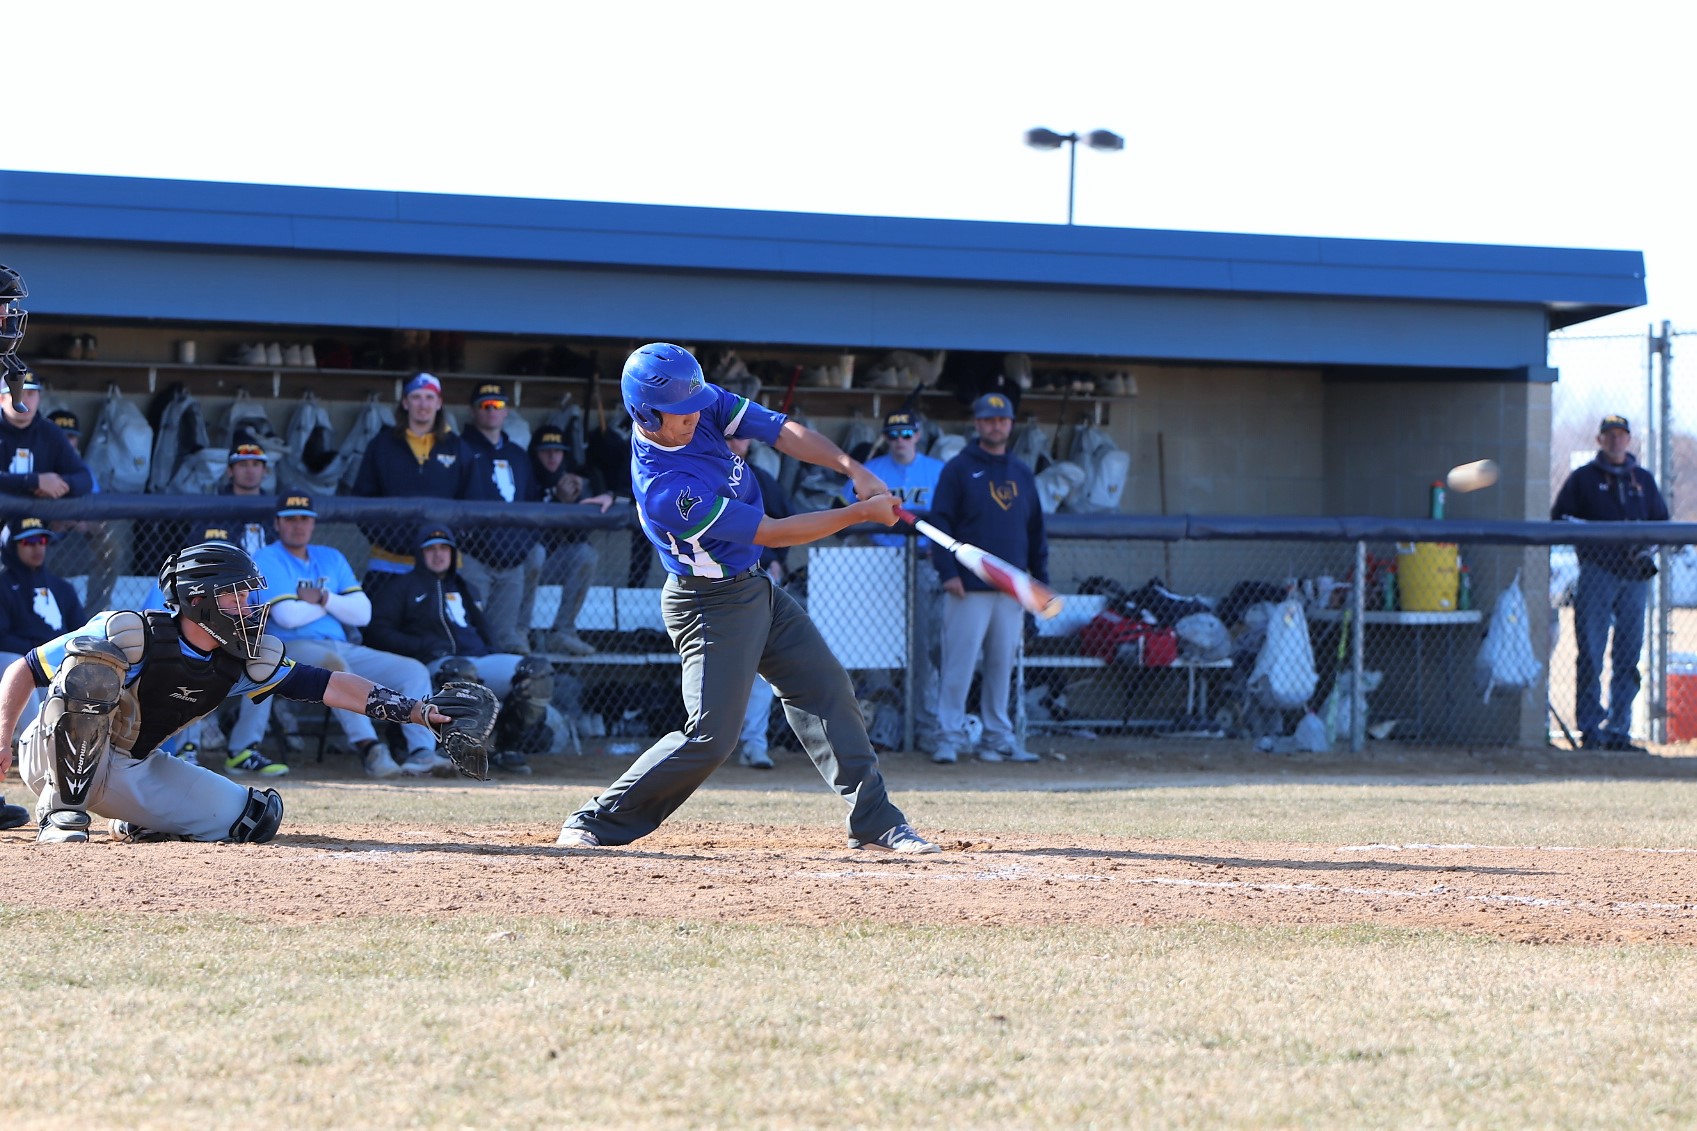 Mark Zhang in mid swing, the ball has left his bat in the air, the opposing dugout looks on from the background